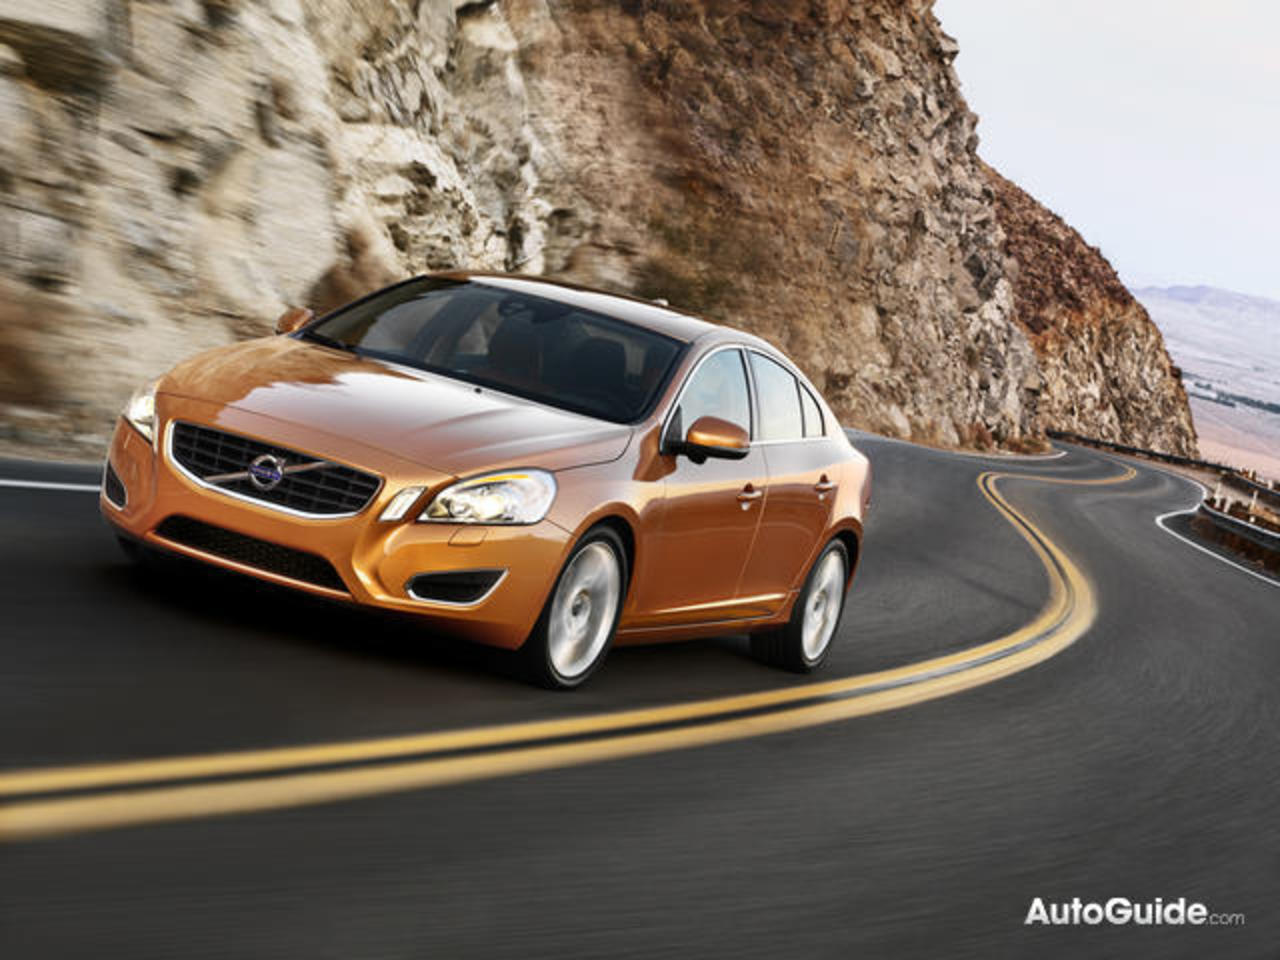 Volvo S60 24. View Download Wallpaper. 640x480. Comments